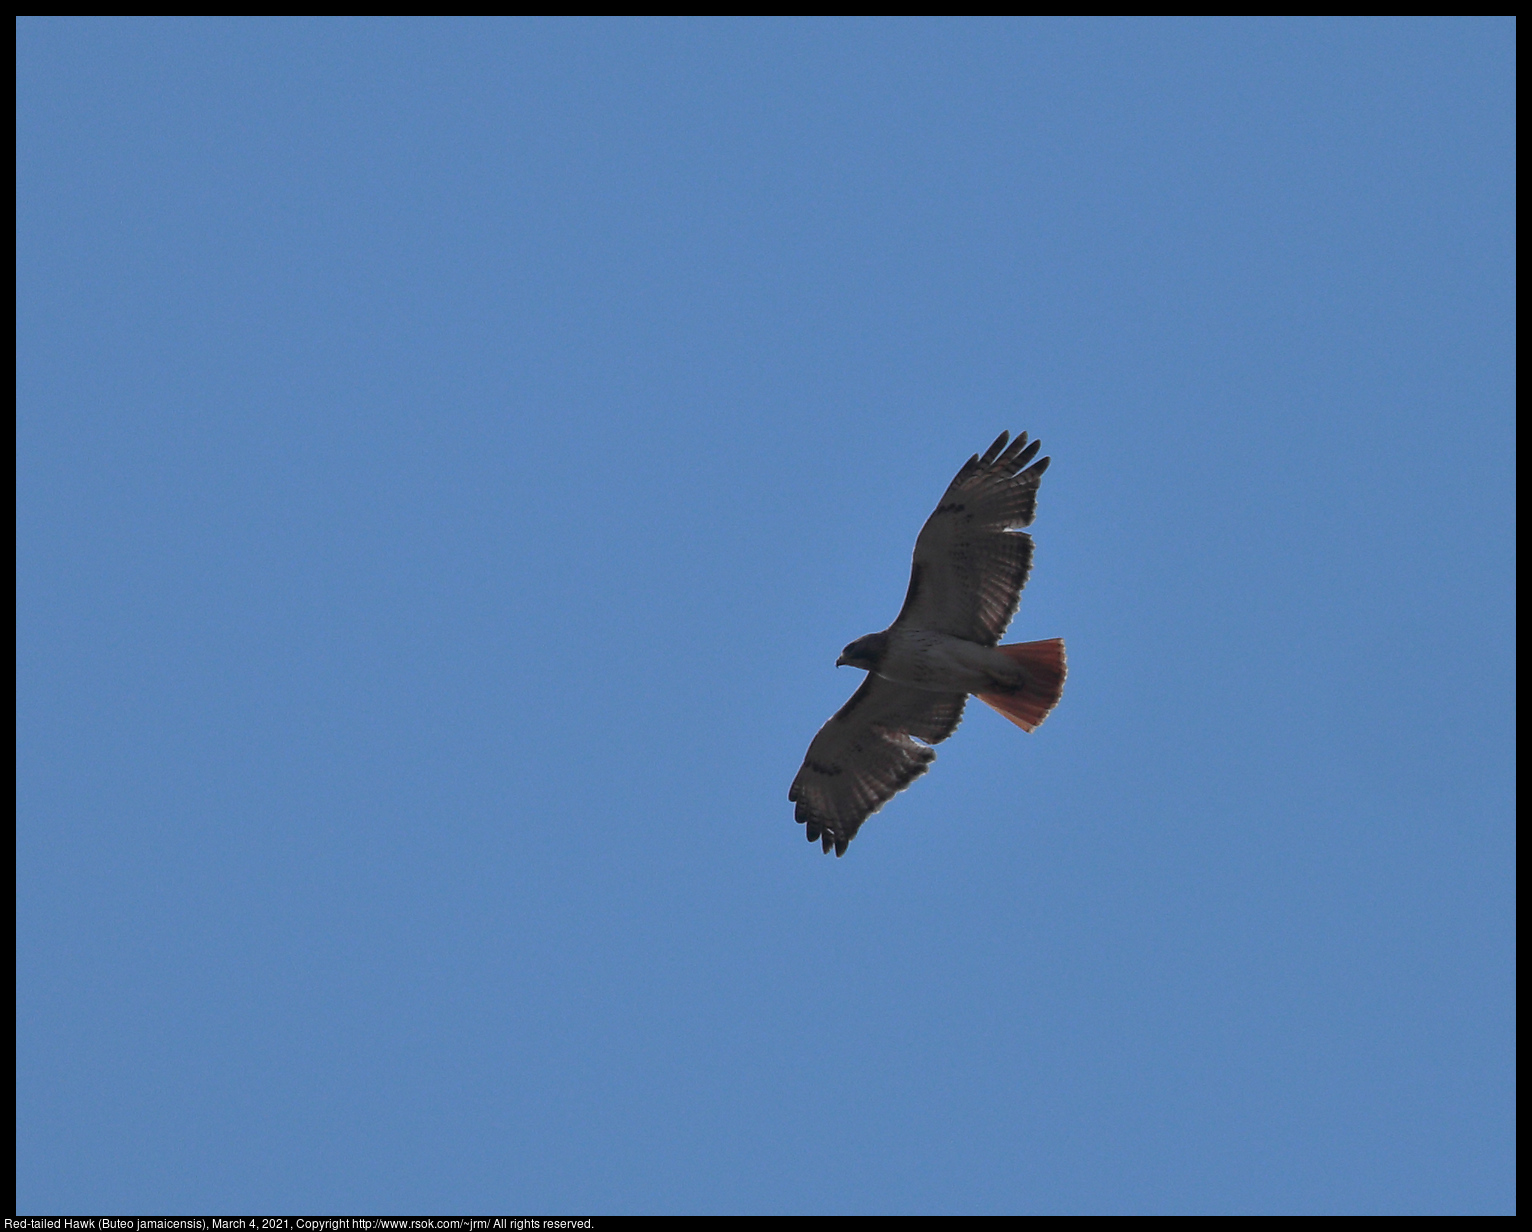 Red-tailed Hawk (Buteo jamaicensis), March 4, 2021